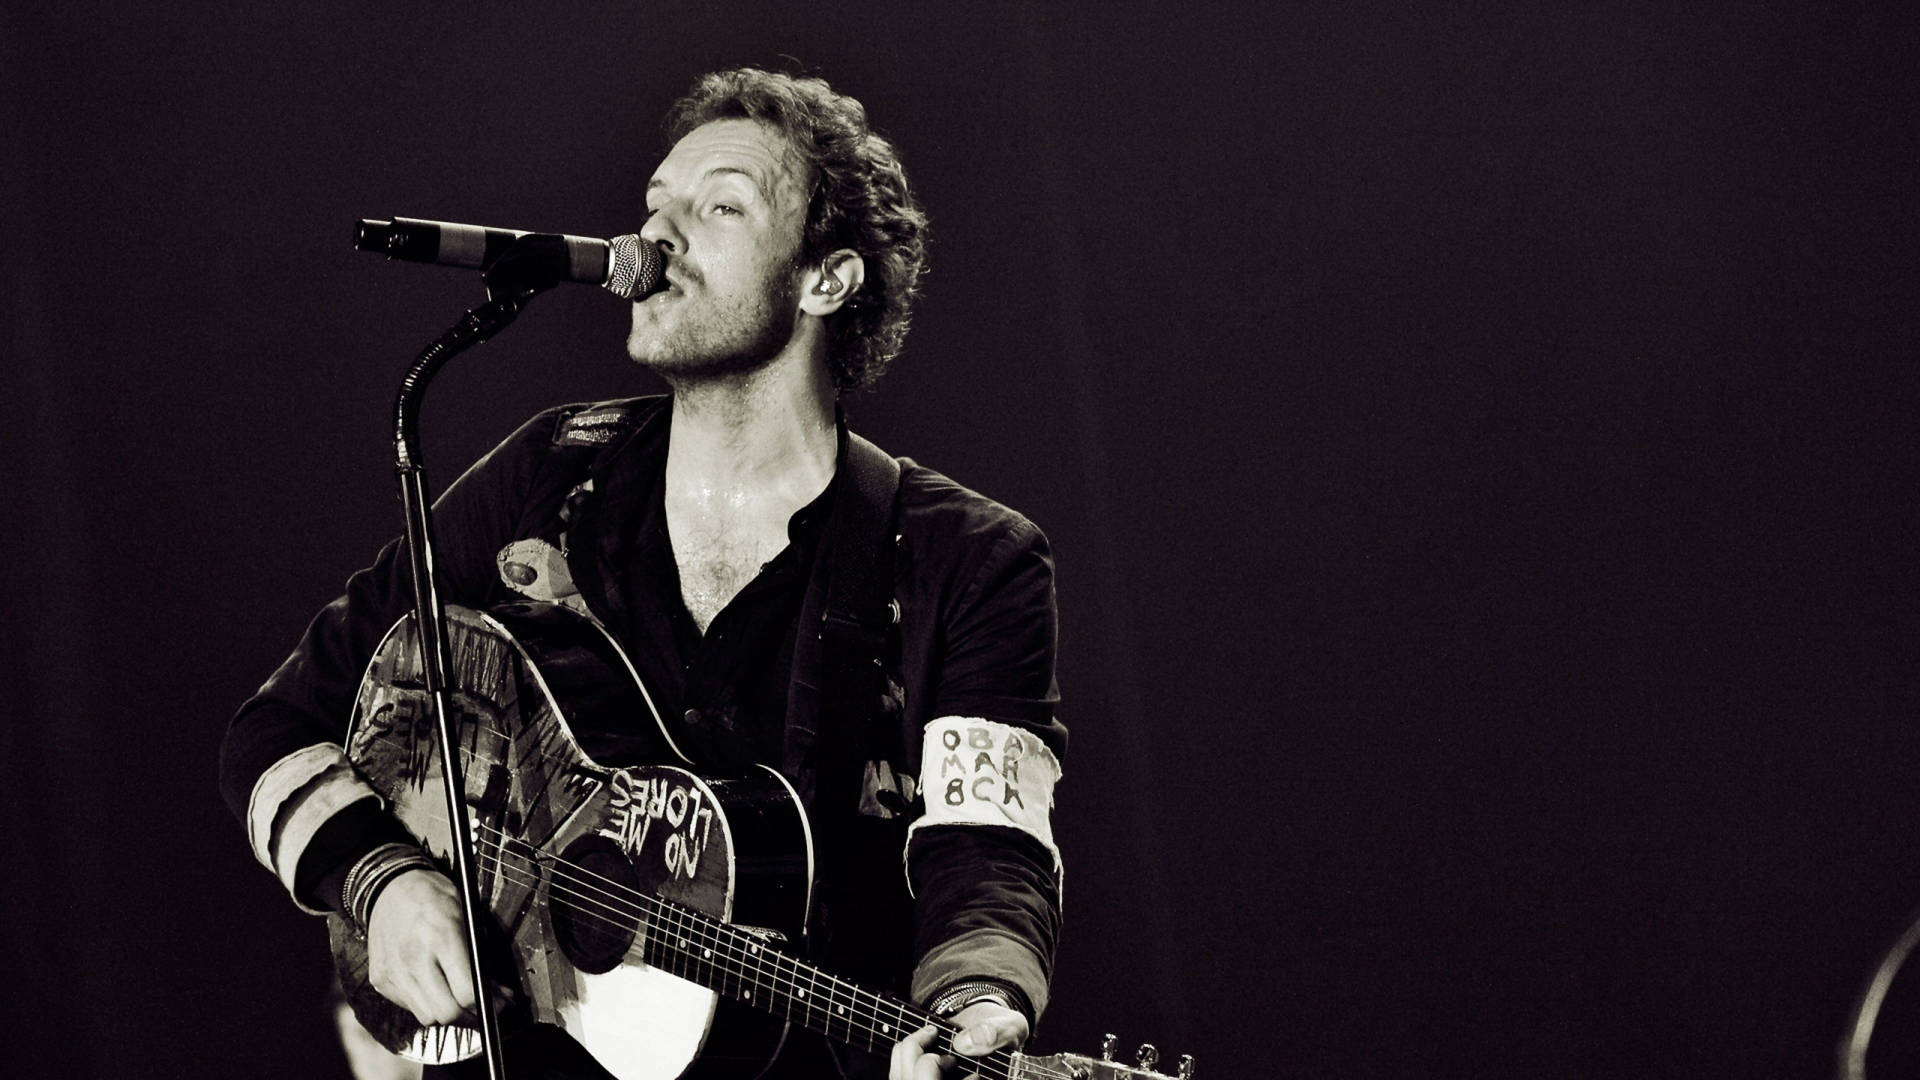 Chris Martin Coldplay Black And White